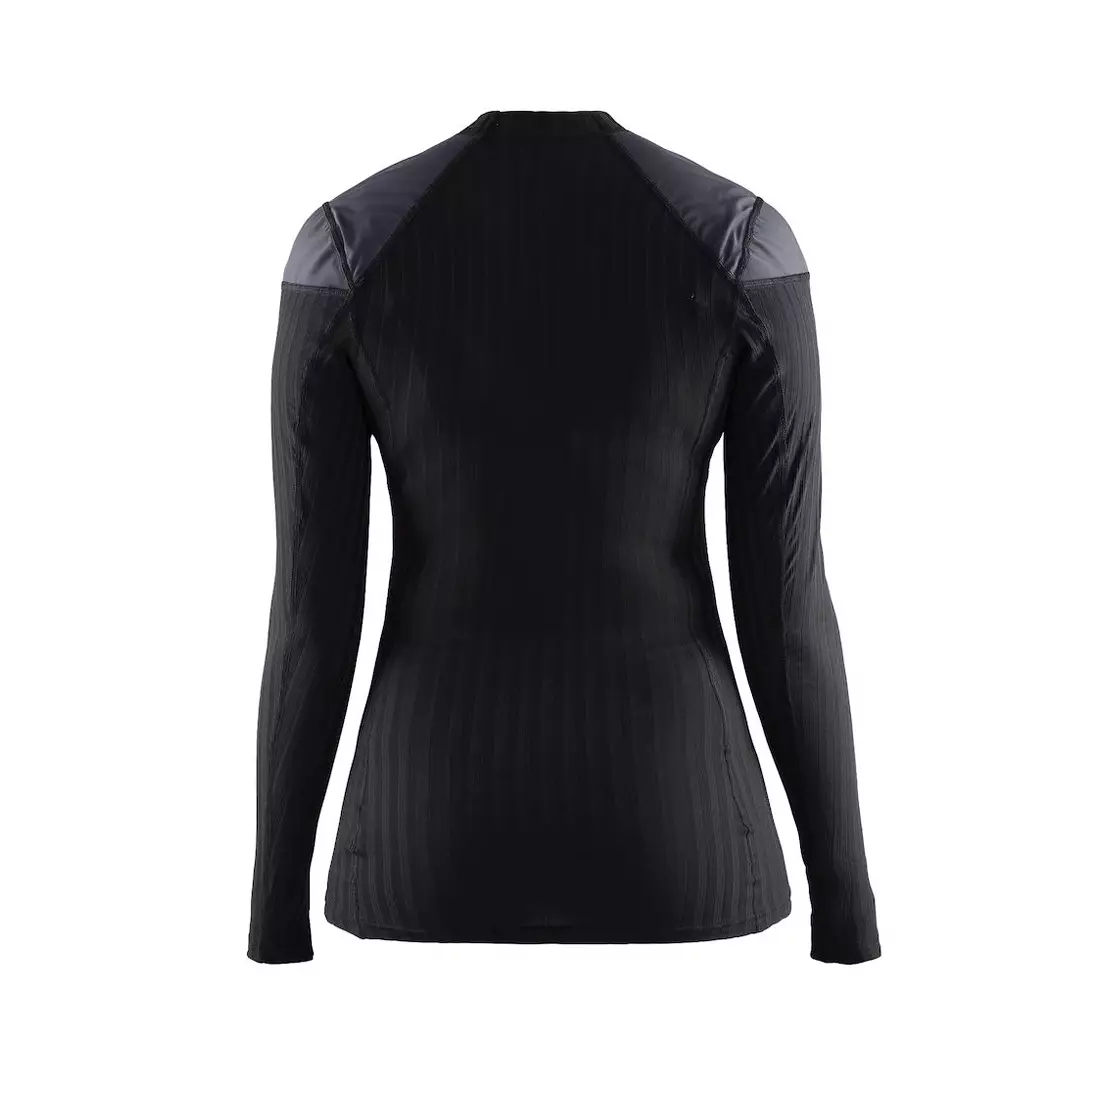 CRAFT BE ACTIVE EXTREME 2.0 WINDSTOPPER Damen-T-Shirt 1904500-9999